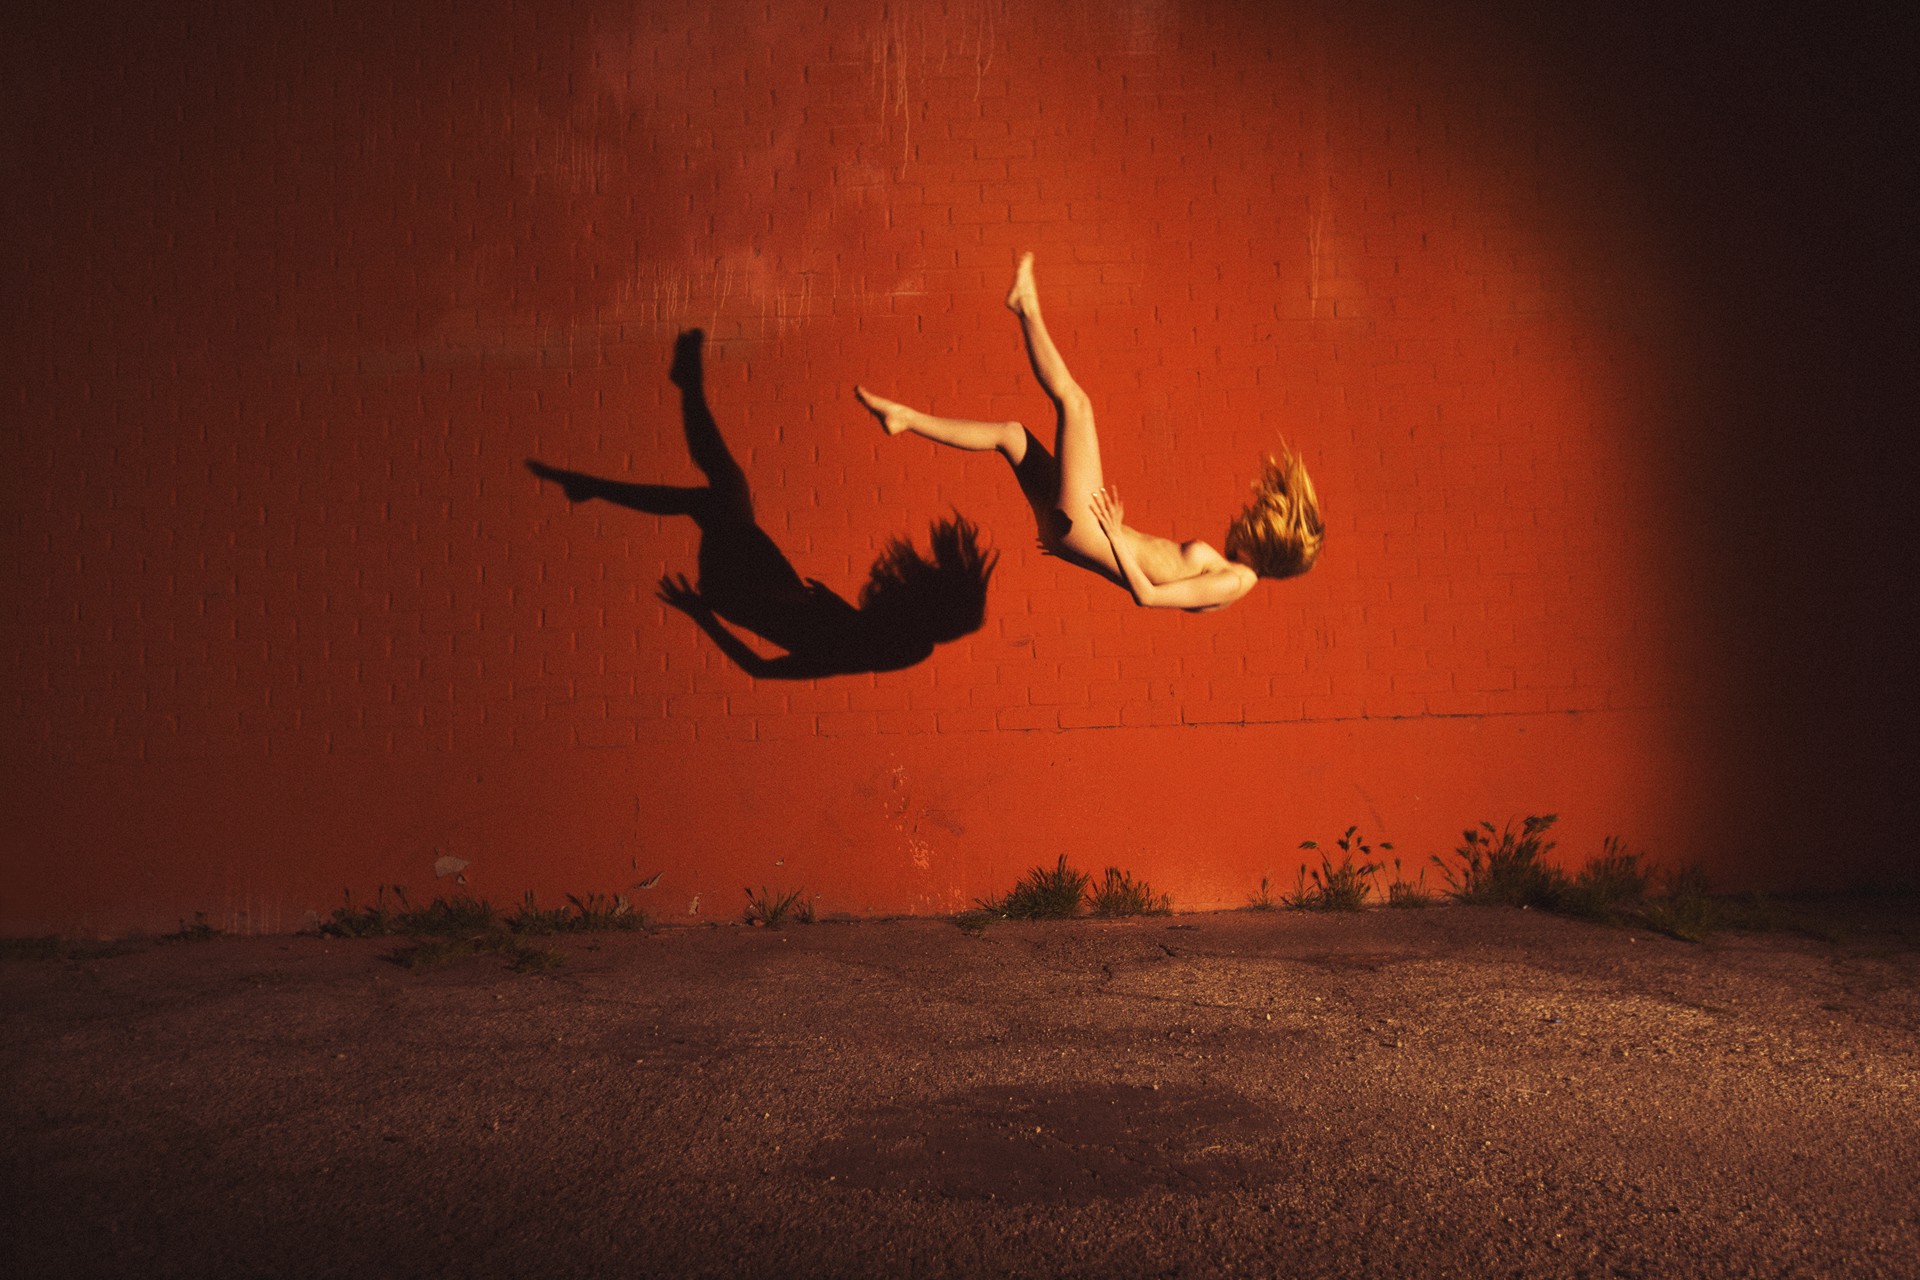 Red Wall by Tyler Shields